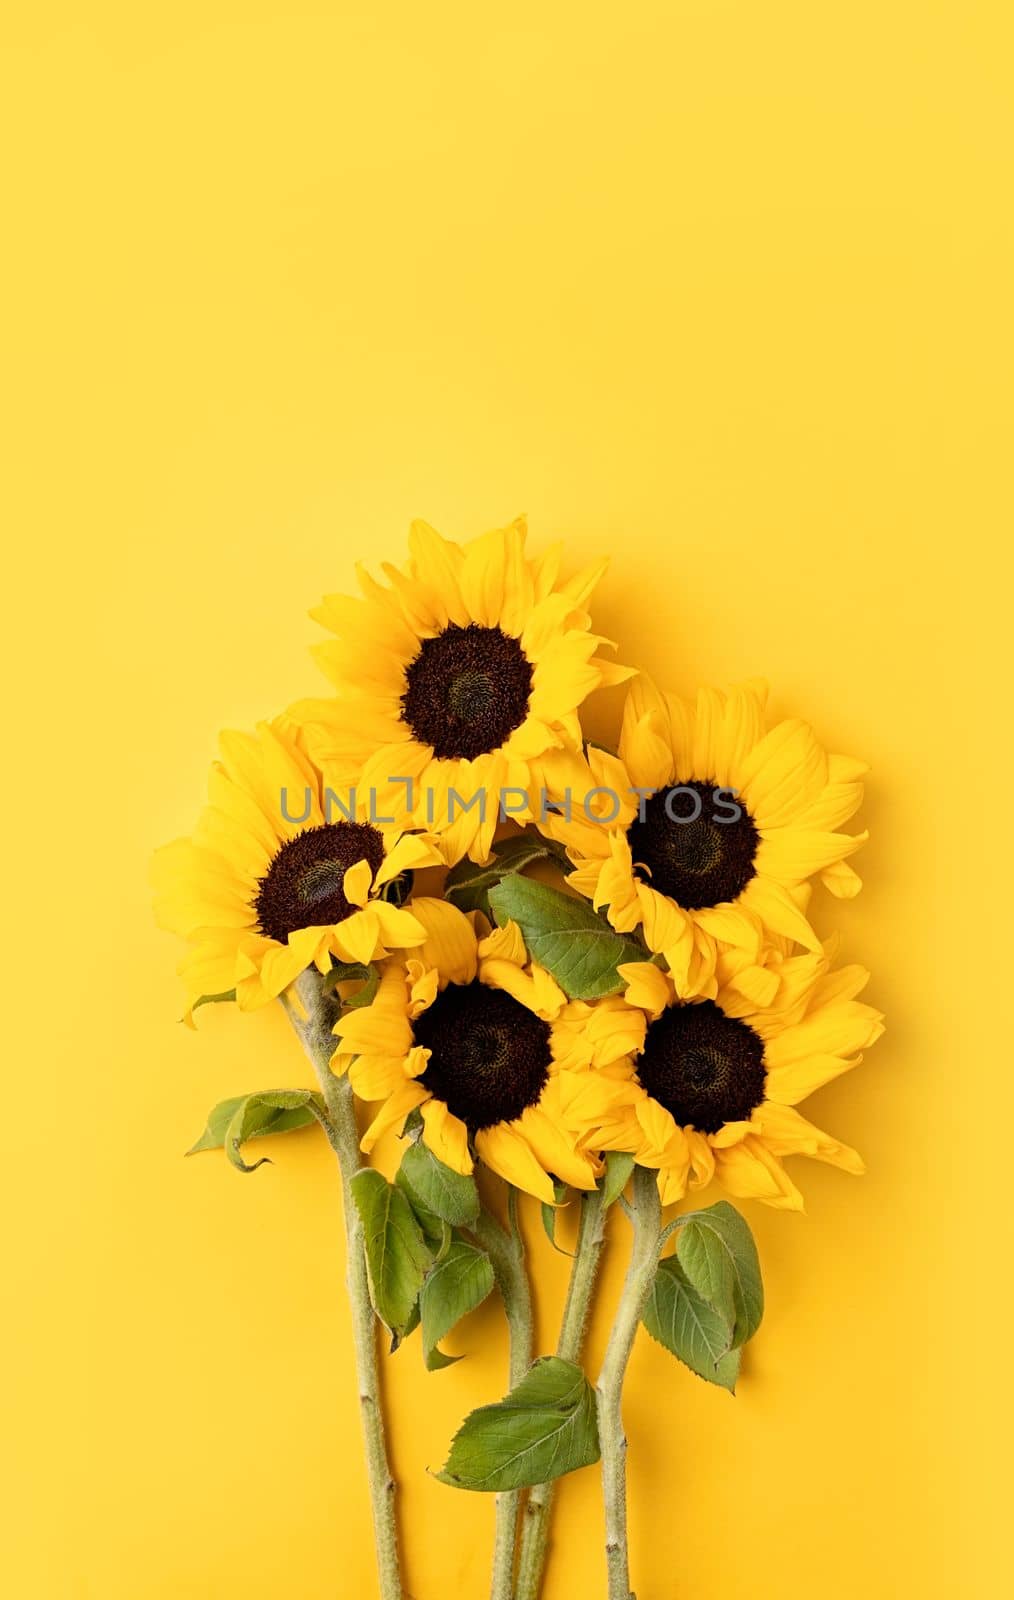 Beautiful fresh sunflowers with leaves on stalk on bright yellow background. Flat lay, top view, copy space. Autumn or summer Concept, harvest time, agriculture. Sunflower natural background